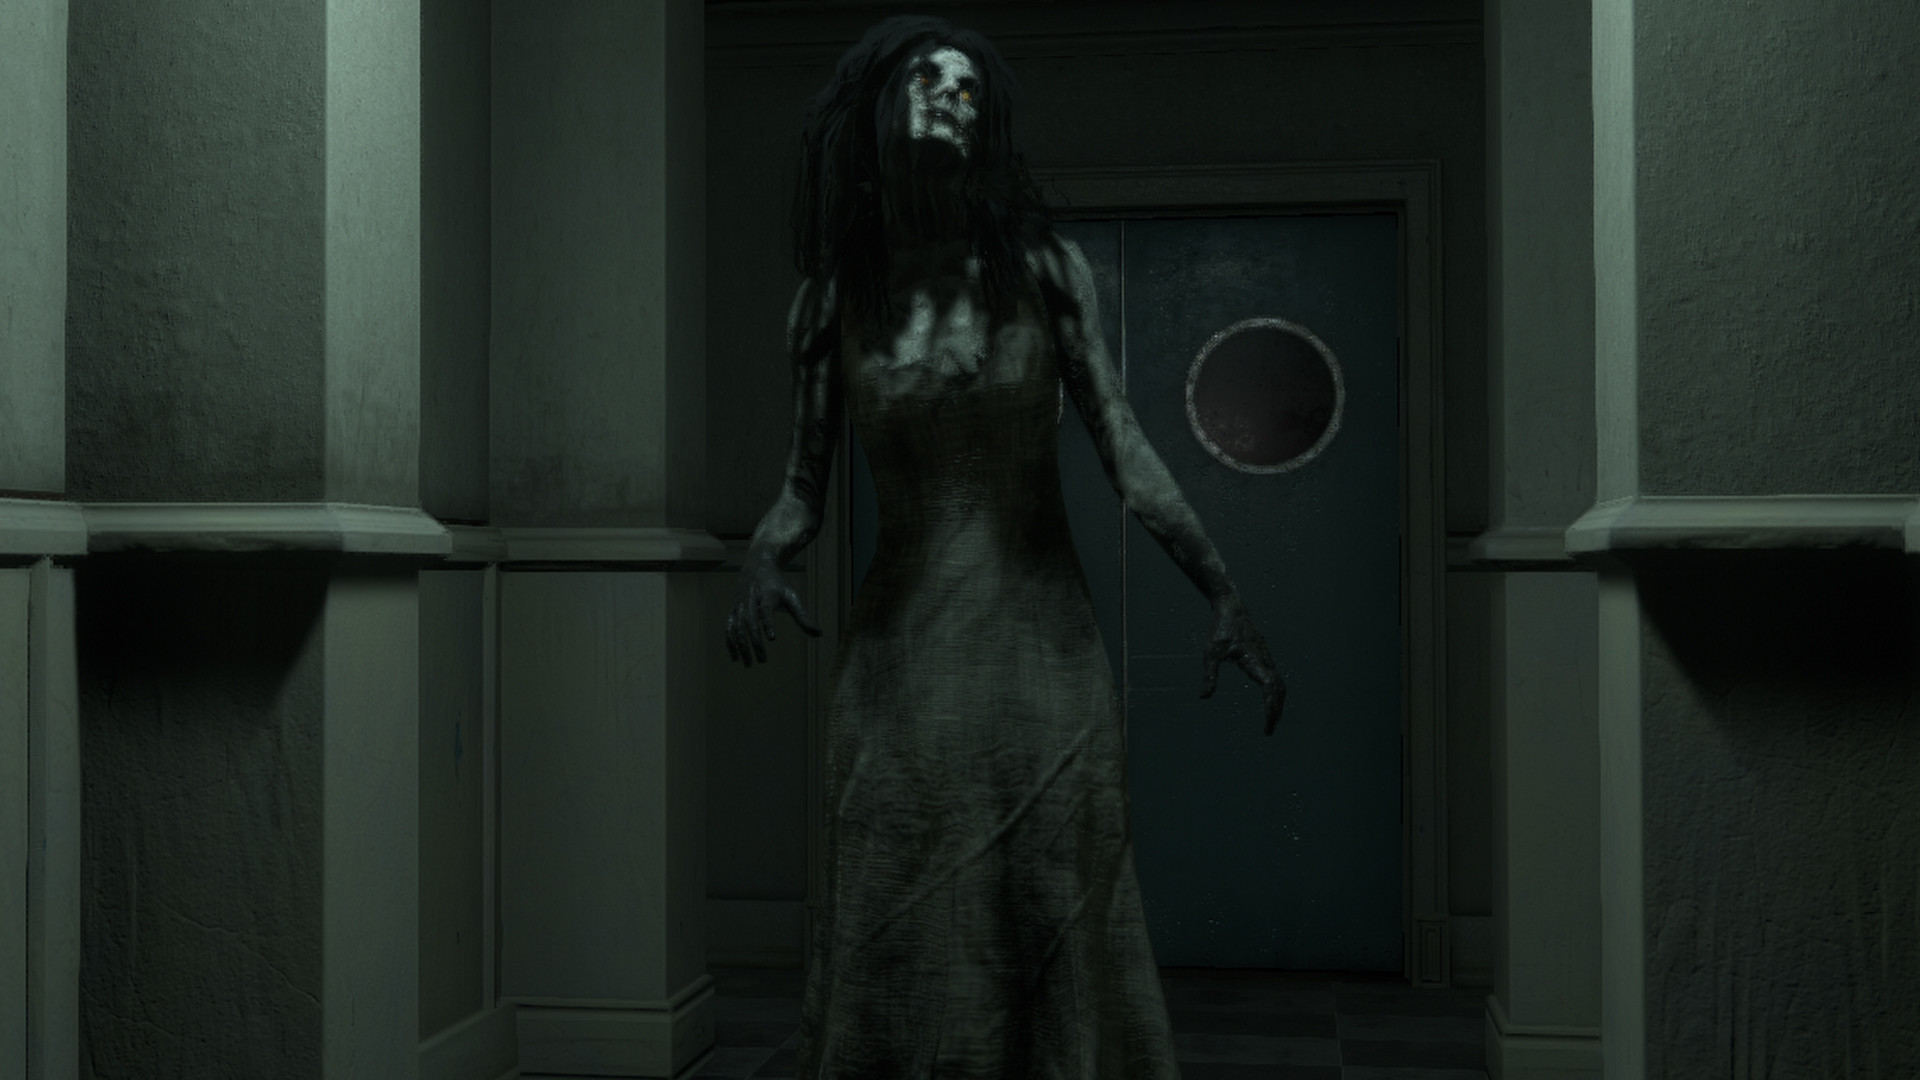 The Mortuary Assistant Free Download